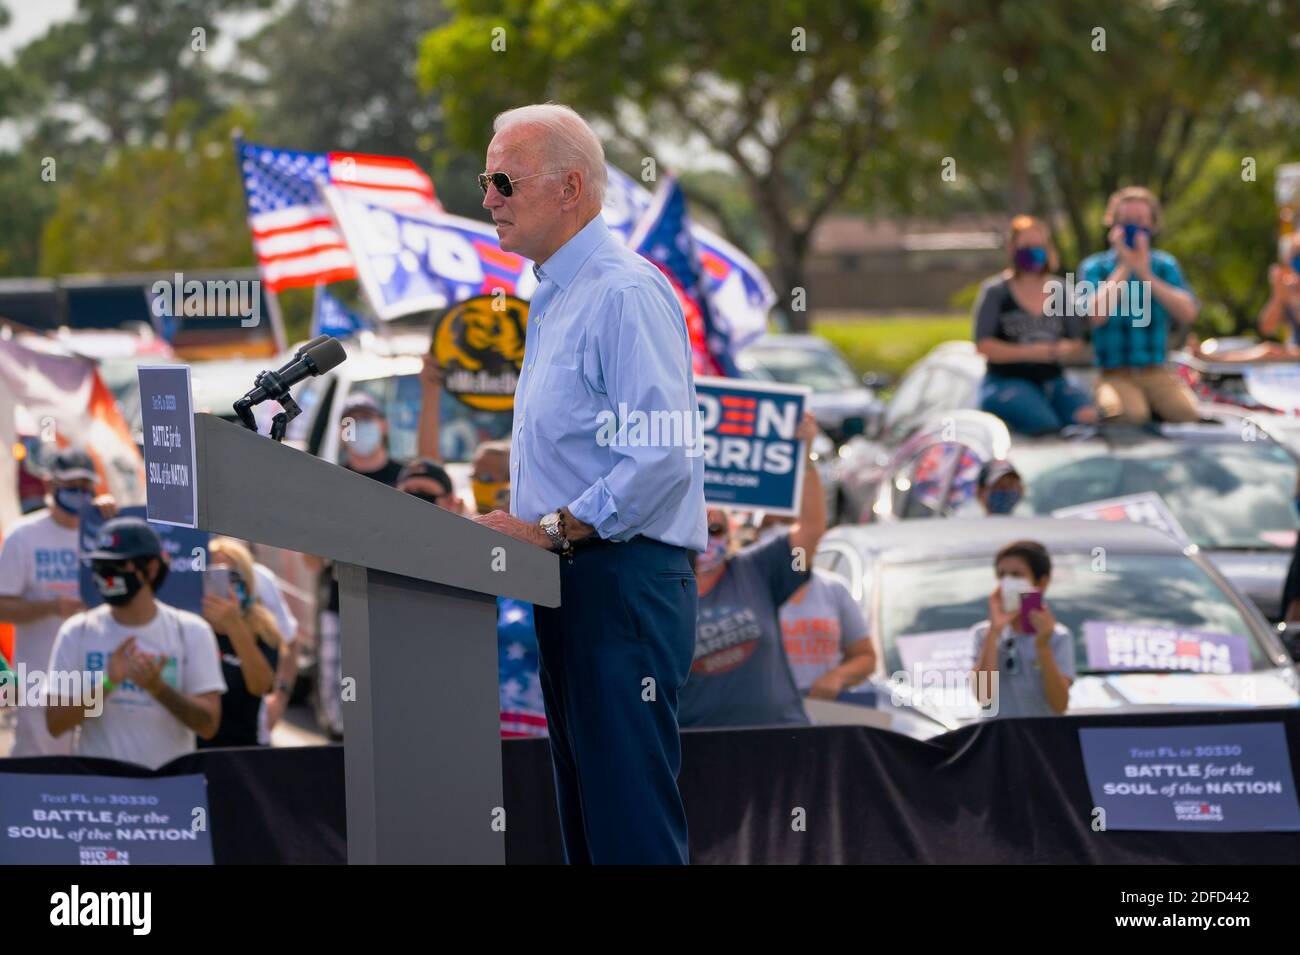 COCONUT CREEK, FL, USA - 29 October 2020 - US democratic presidential candidate Joe Biden at a Drive-In Rally at Broward College - Coconut Creek, Flor Stock Photo